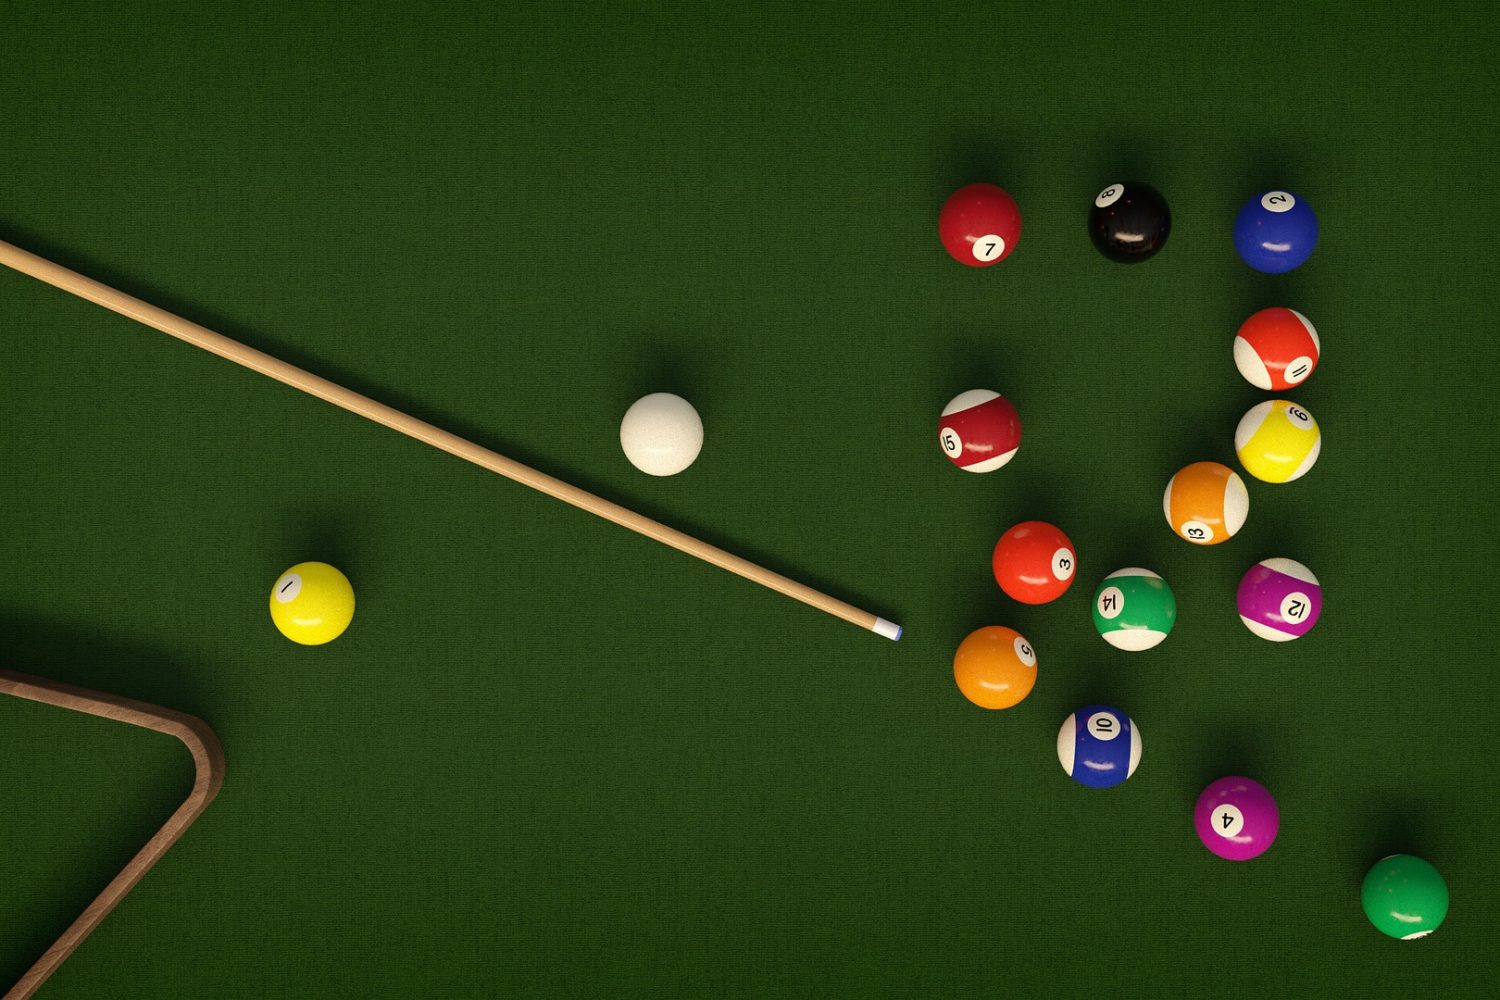 Buffalo Billiards is auctioning off their pool table after the bar's closing day. Image courtesy of Pixabay user Piro4d.